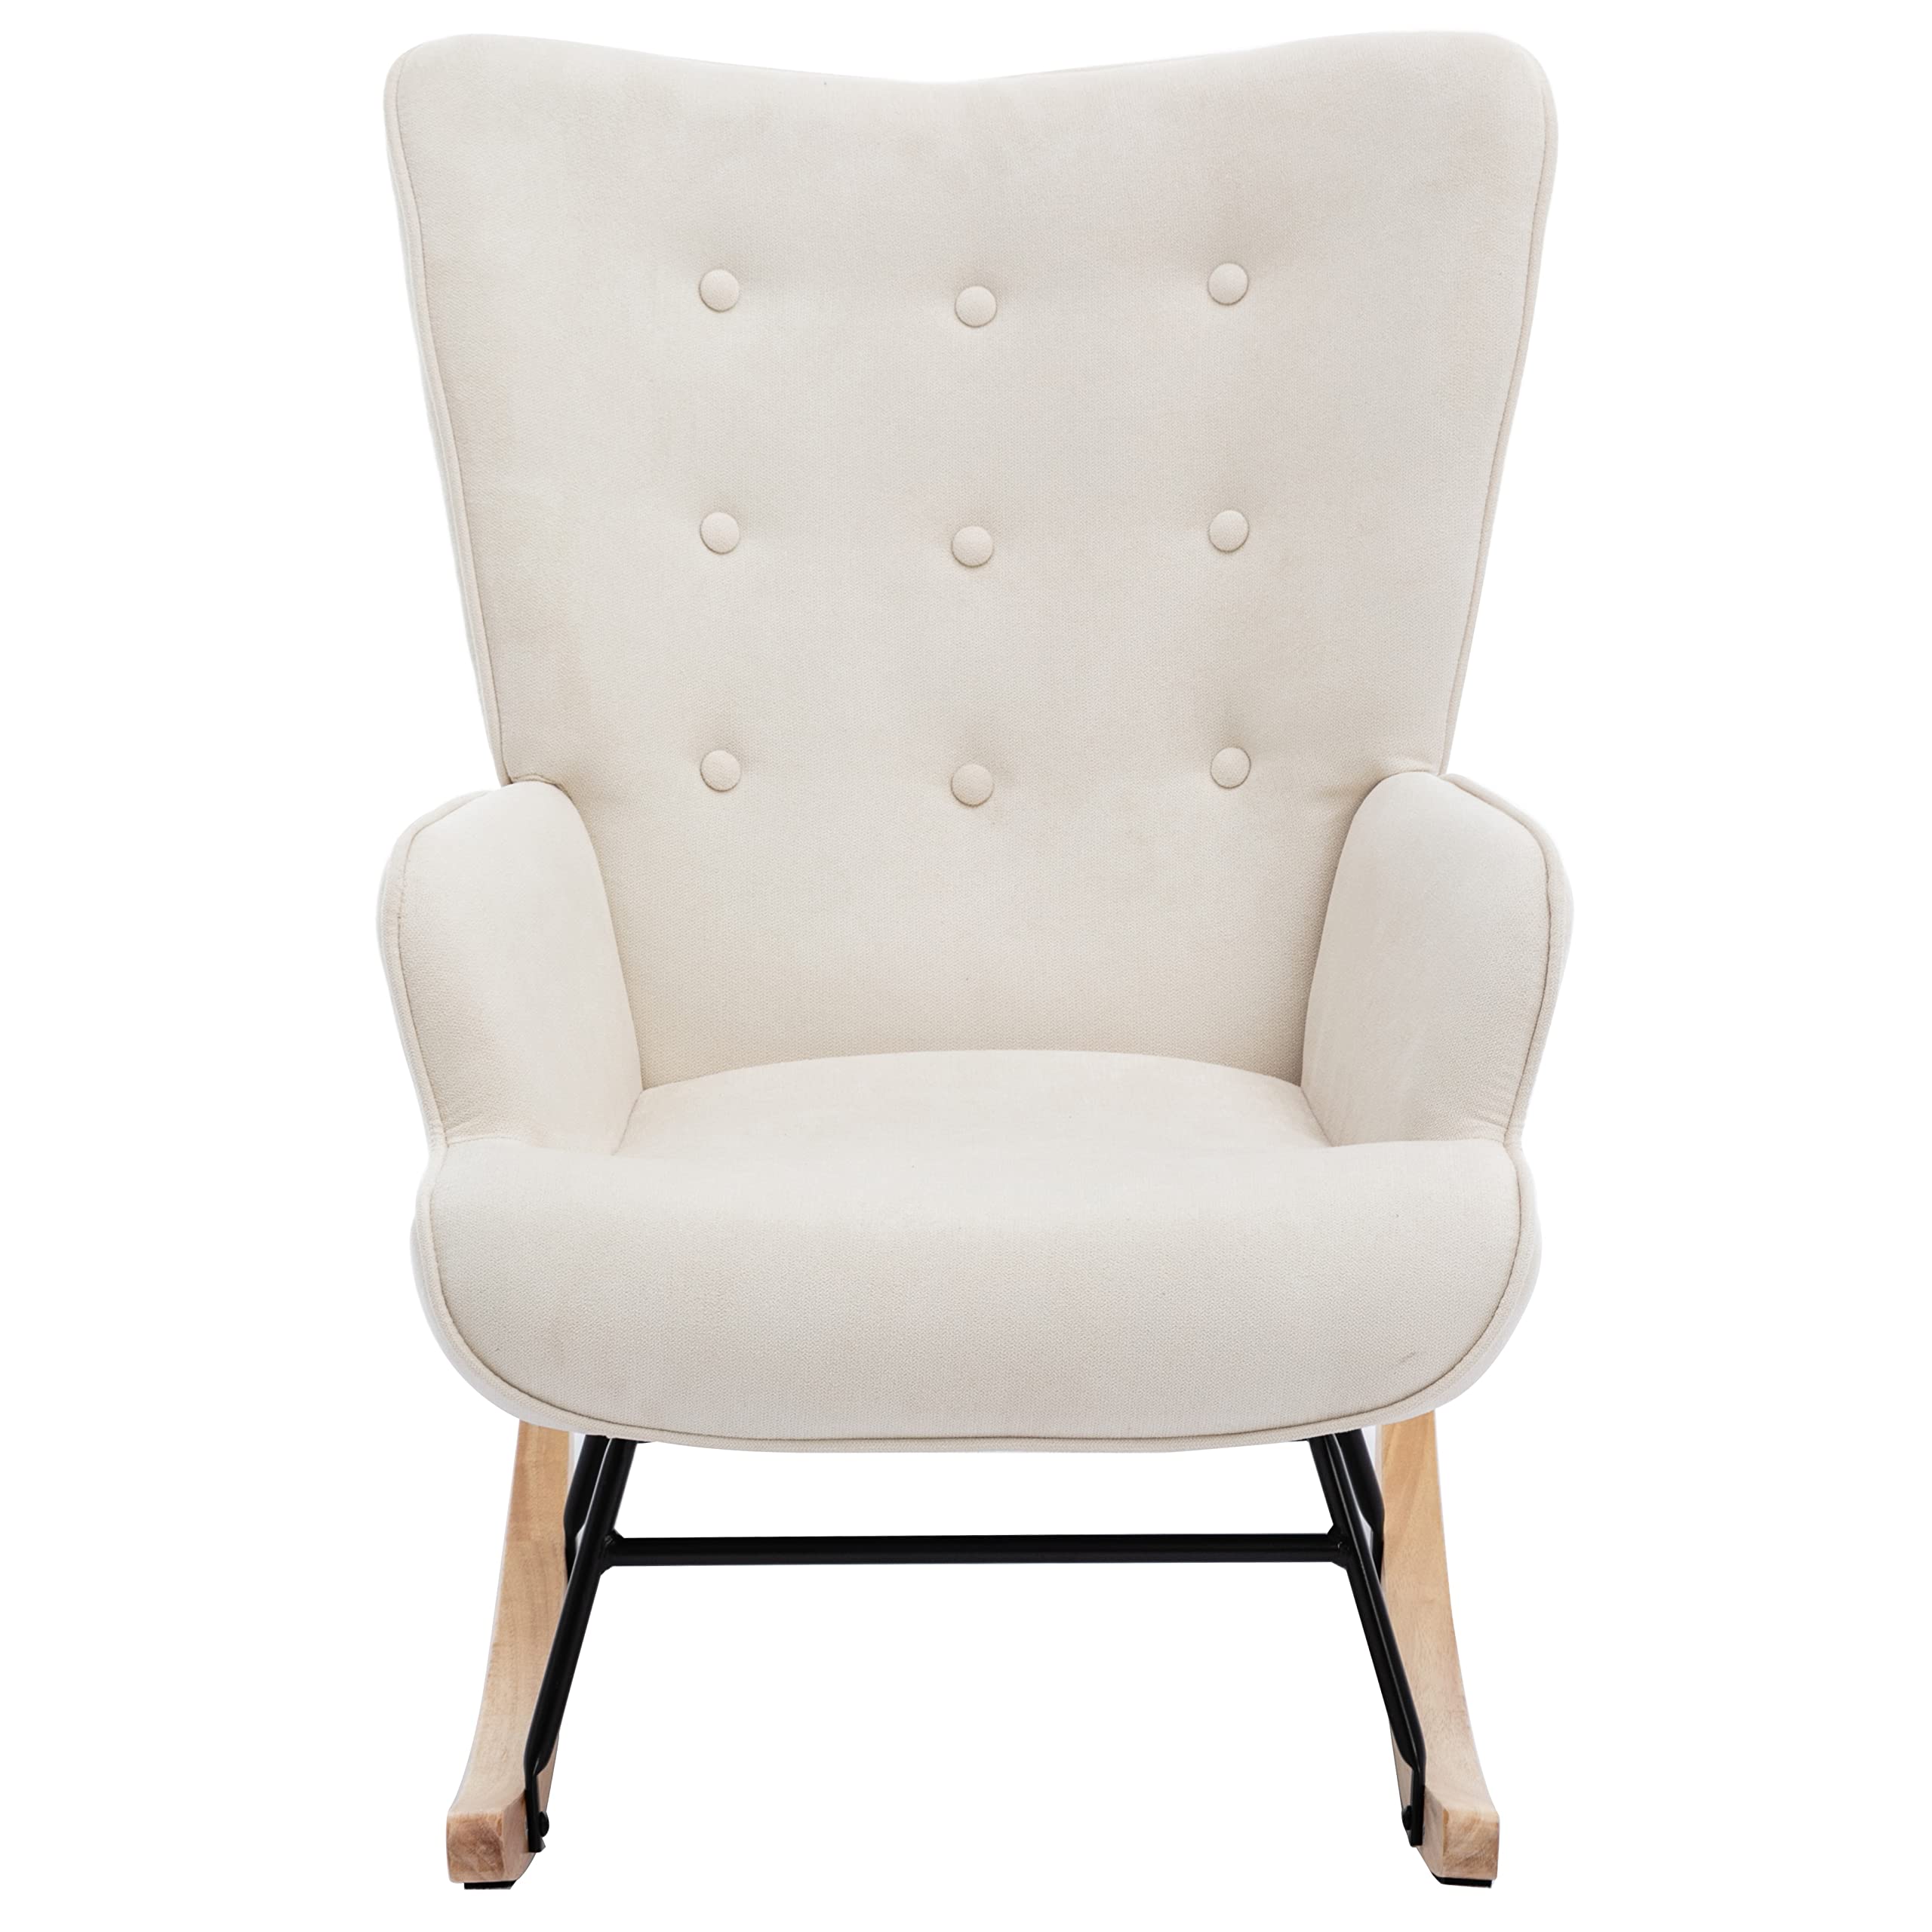 Accent Rocking Chair with Ottoman, Modern Tufted Button Wingback Glider Rocker Armchair with Solid Wood Legs, Beige